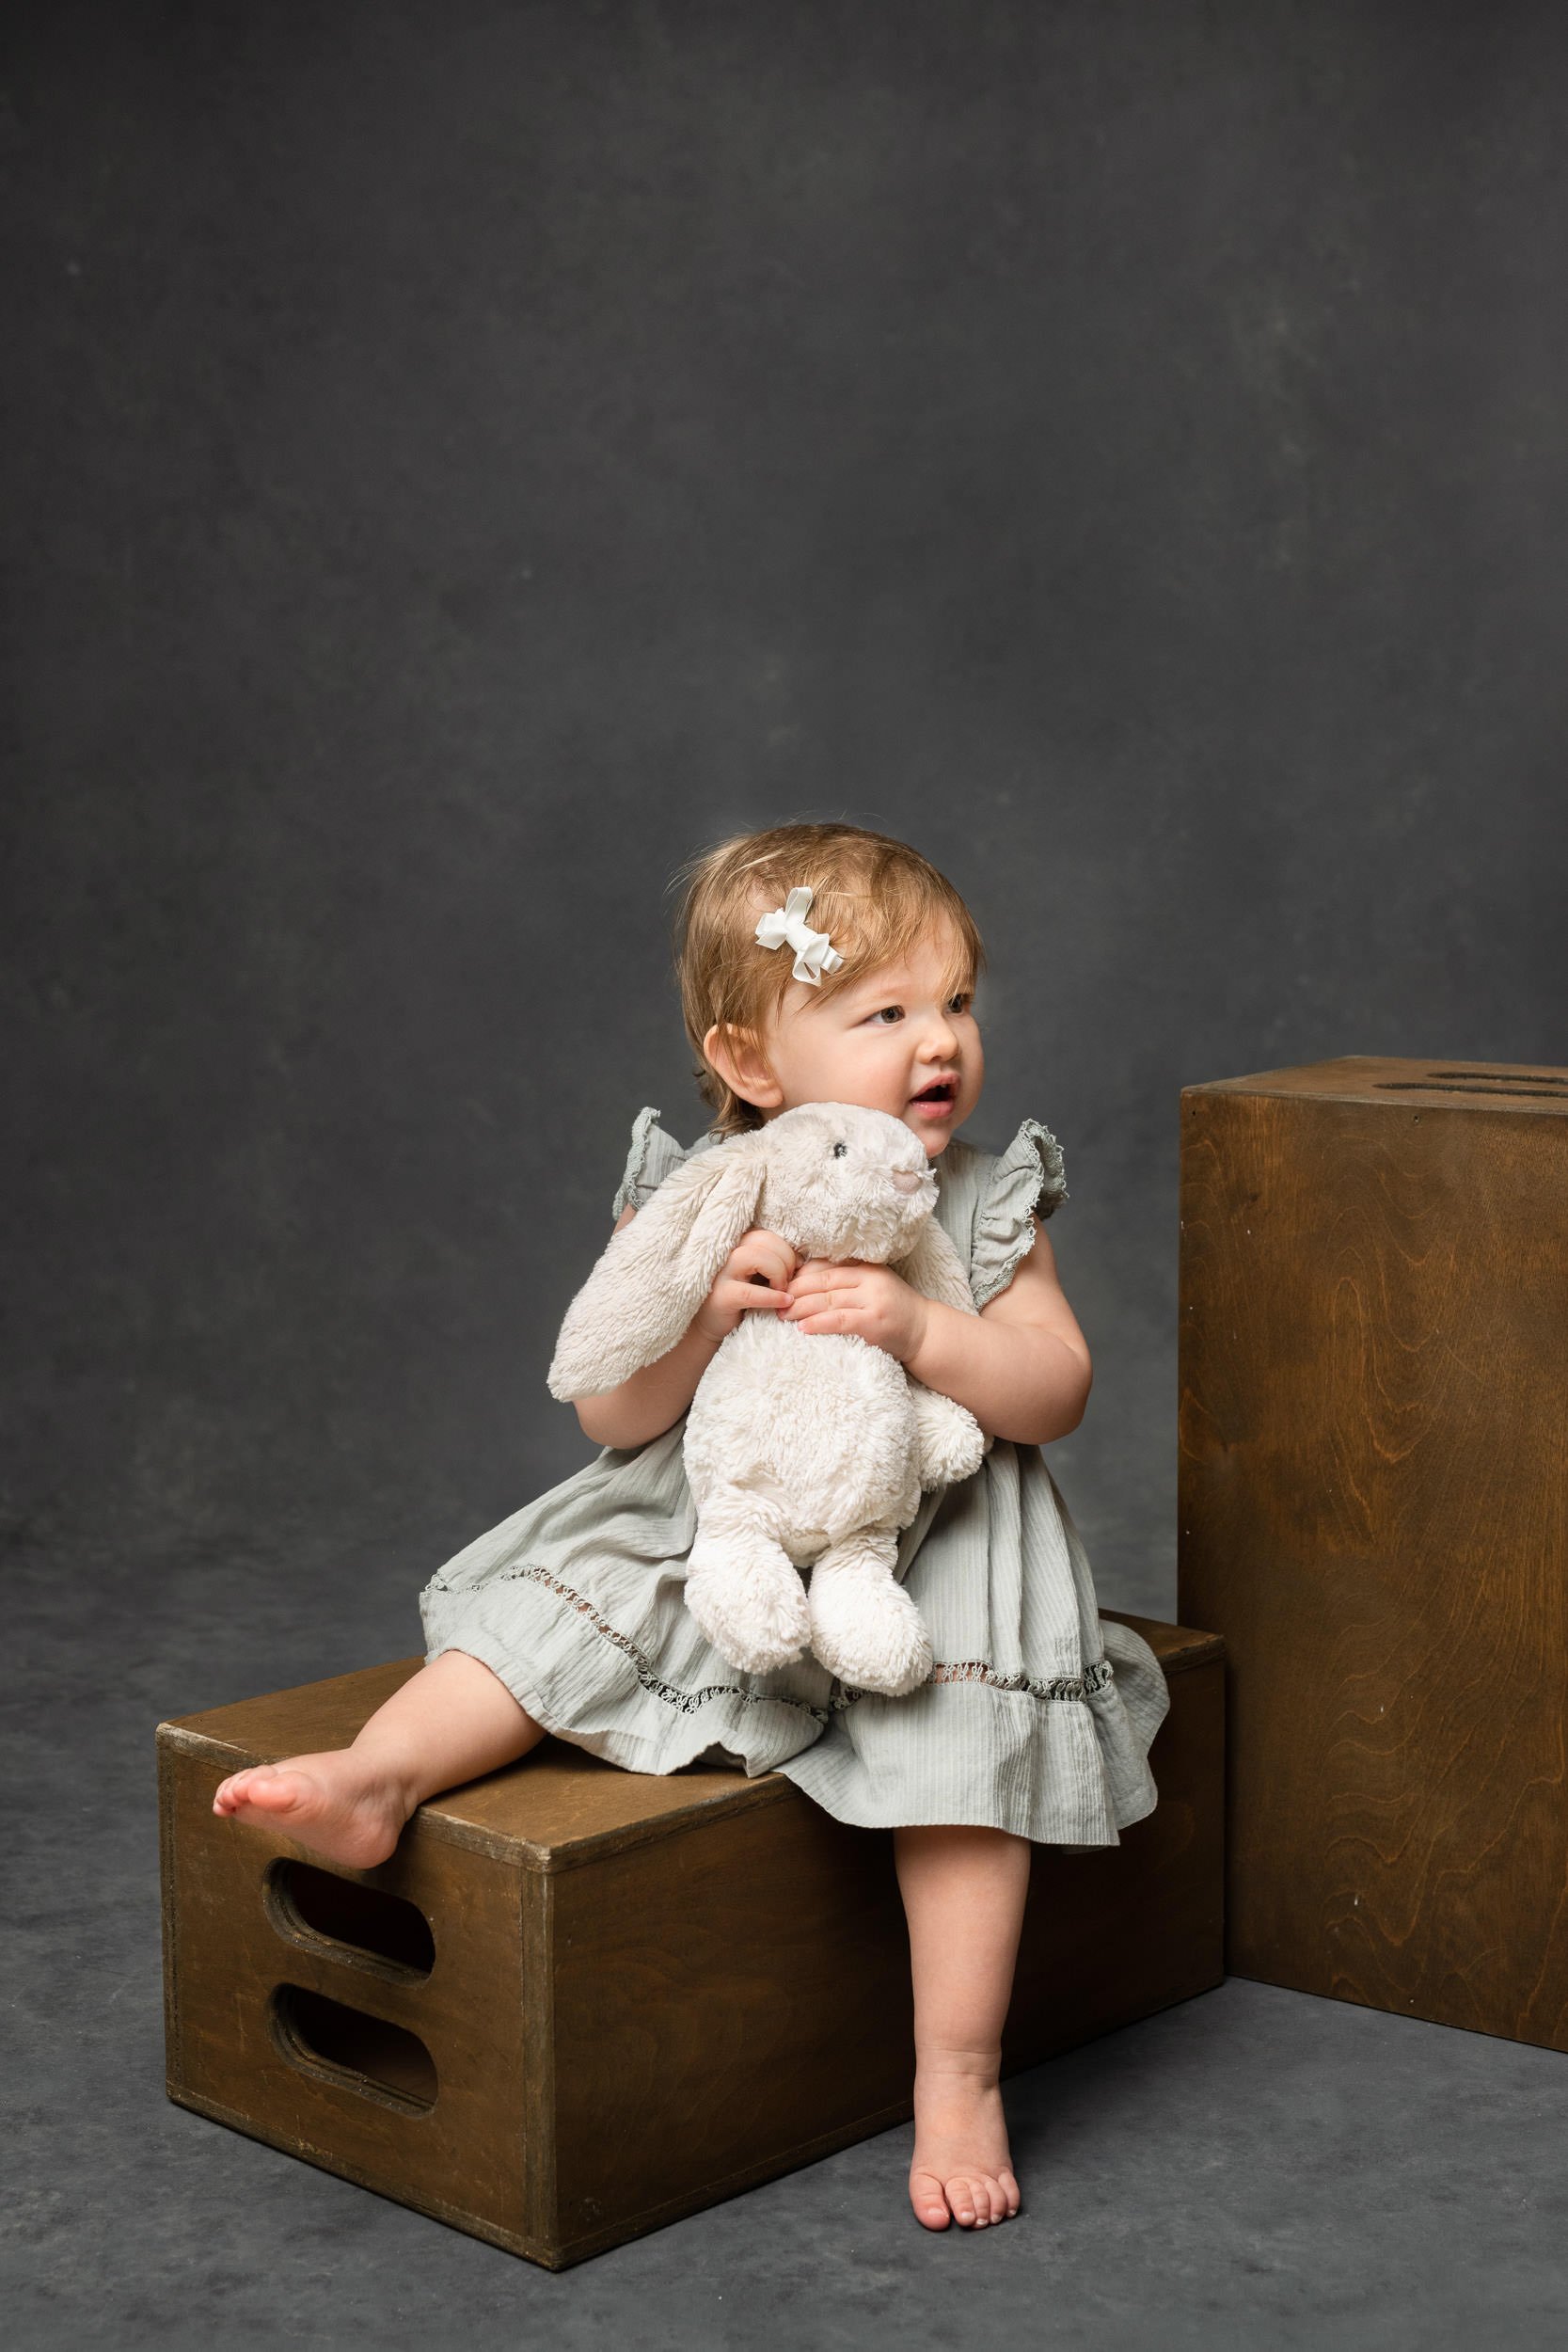  Portrait of a little girl holding a stuffed bunny sitting on a wooden crate captured by Nicole Hawkins Photography. baby bunny #NicoleHawkinsPhotography #NicoleHawkinsBabies #studiochildren #firstbirthday #studiophotography #girlsbirthdayportraits 